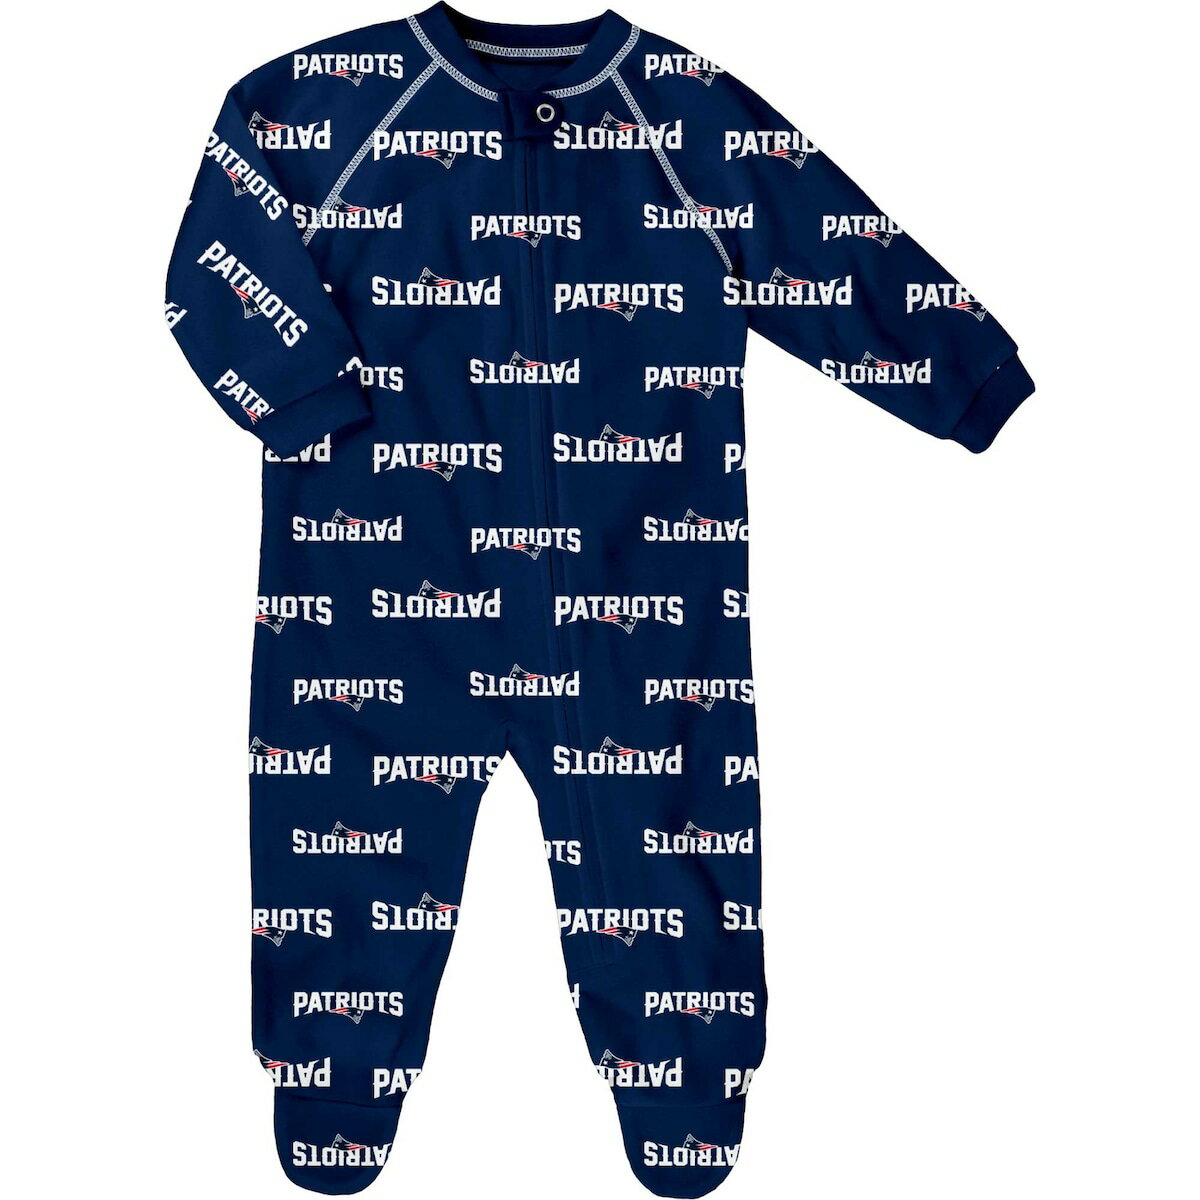 Provide your budding New England Patriots fan with comfort and spirit each night by dressing them in this full-zip jumper. It features roomy raglan sleeves so they can stretch, crawl and sleep in comfort. An allover New England Patriots print easily displays which team they'll root for each Sunday.ImportedMachine wash with garment inside out, tumble dry lowOfficially licensedMaterial: 100% PolyesterFlame resistantFlatlock stitchingRaglan sleevesInseam on size 18M measures approx. 10"Full-zipBrand: OuterstuffSnap closure at neckLong sleeveSublimated graphicsFooted with non-slip dots